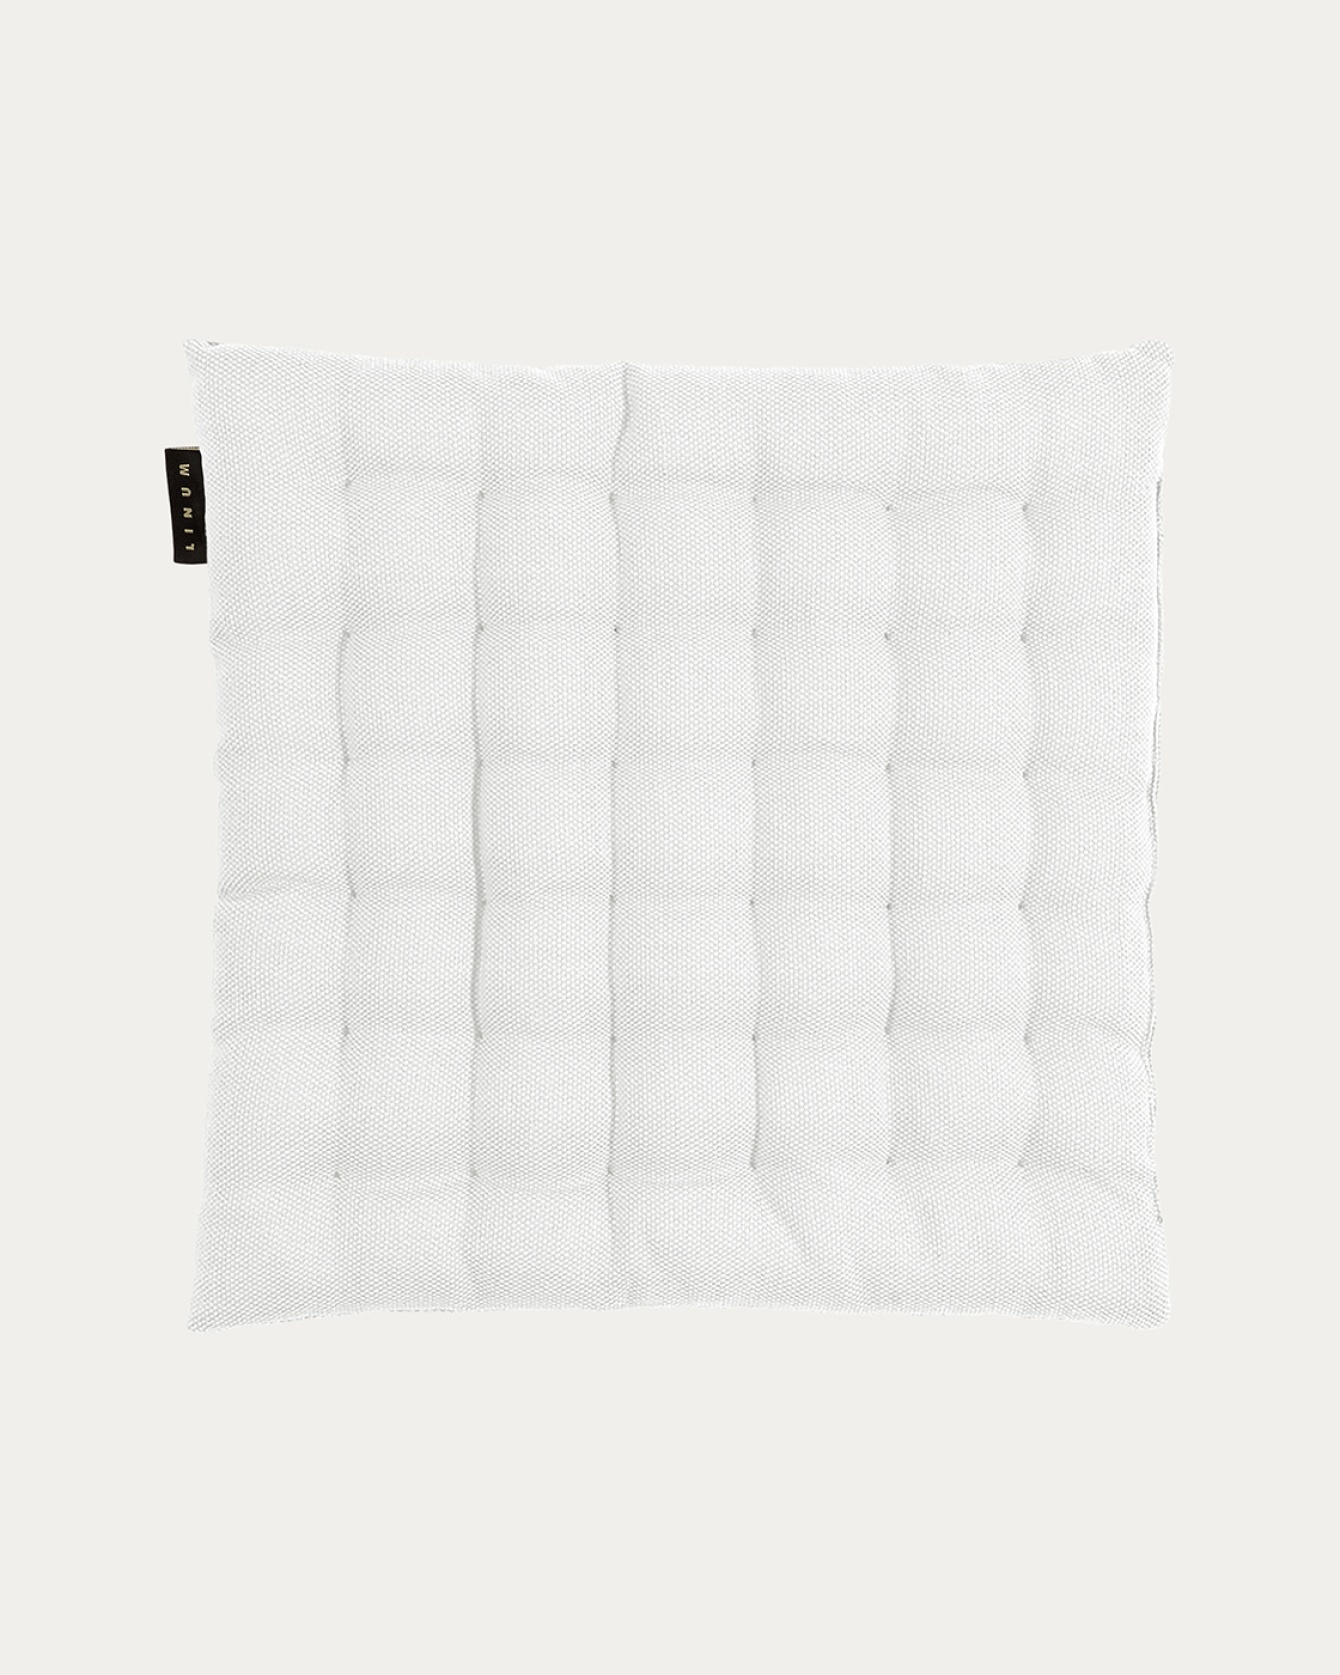 Product image white PEPPER seat cushion made of soft cotton with recycled polyester filling from LINUM DESIGN. Size 40x40 cm.